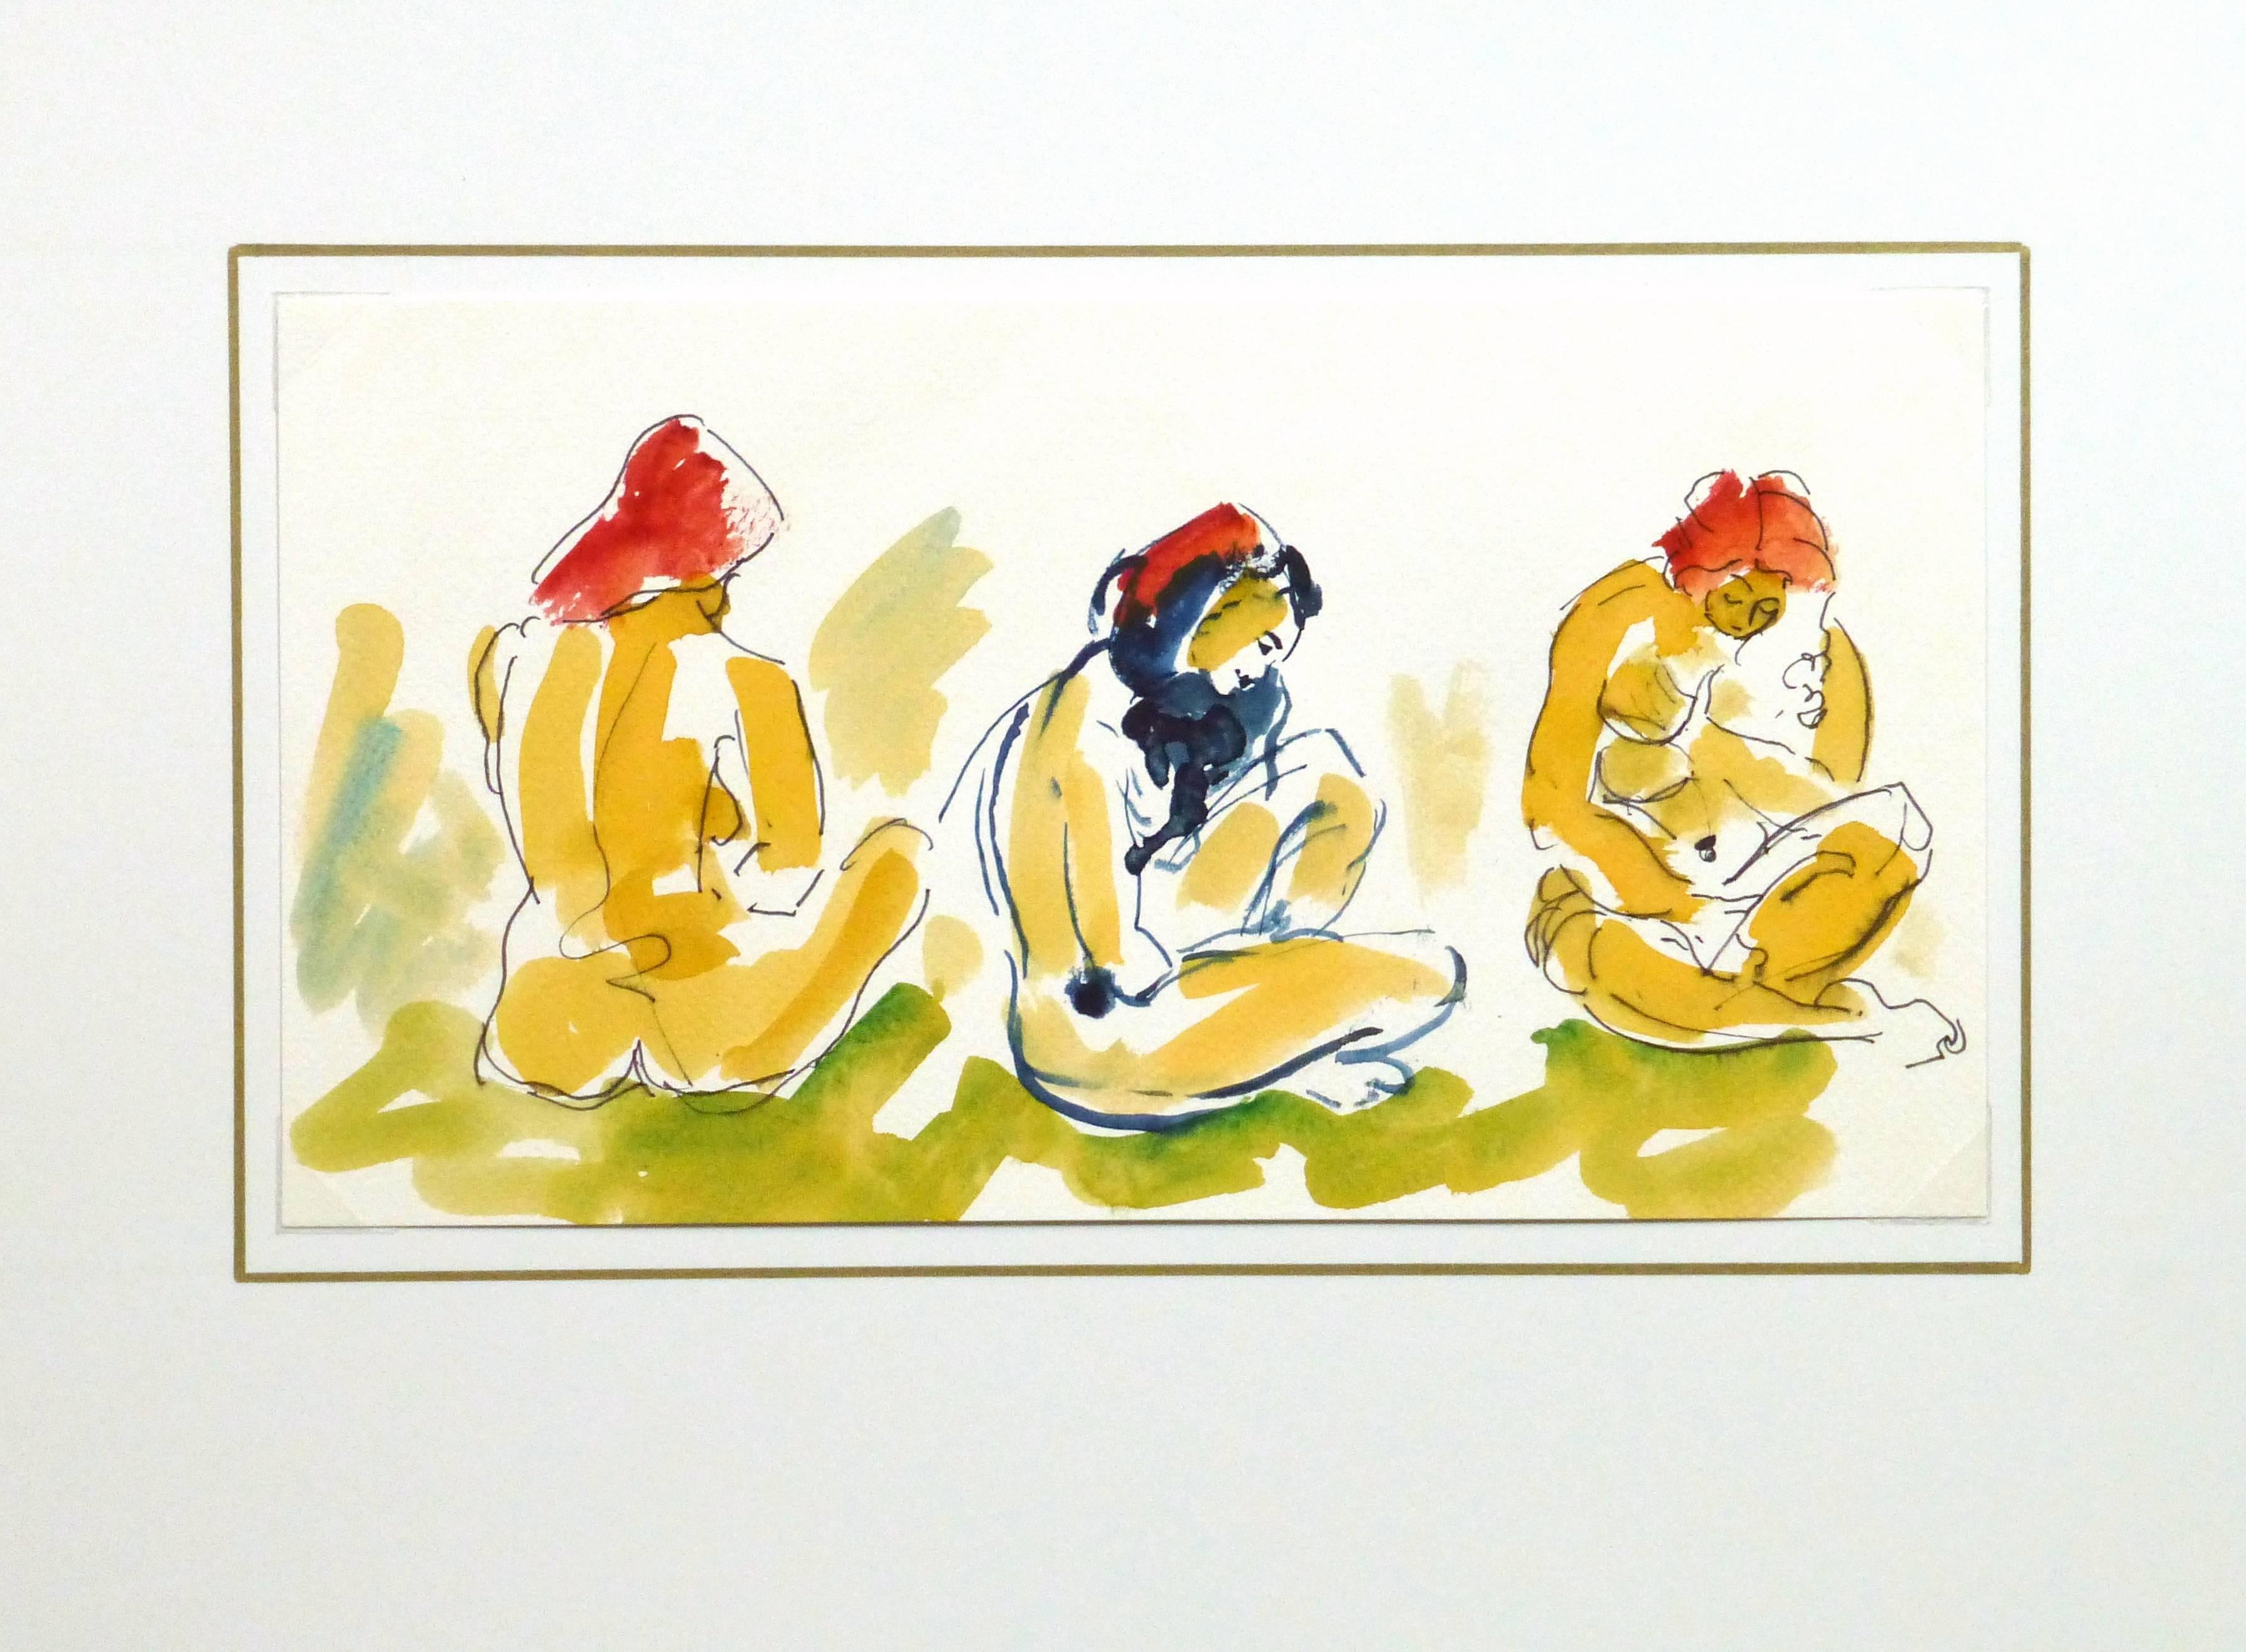 Brightly hued watercolor and ink painting of auburn haired nude females seated from various angles, circa 1990. 

Original artwork on paper displayed on a white mat with a gold border. Archival plastic sleeve and Certificate of Authenticity